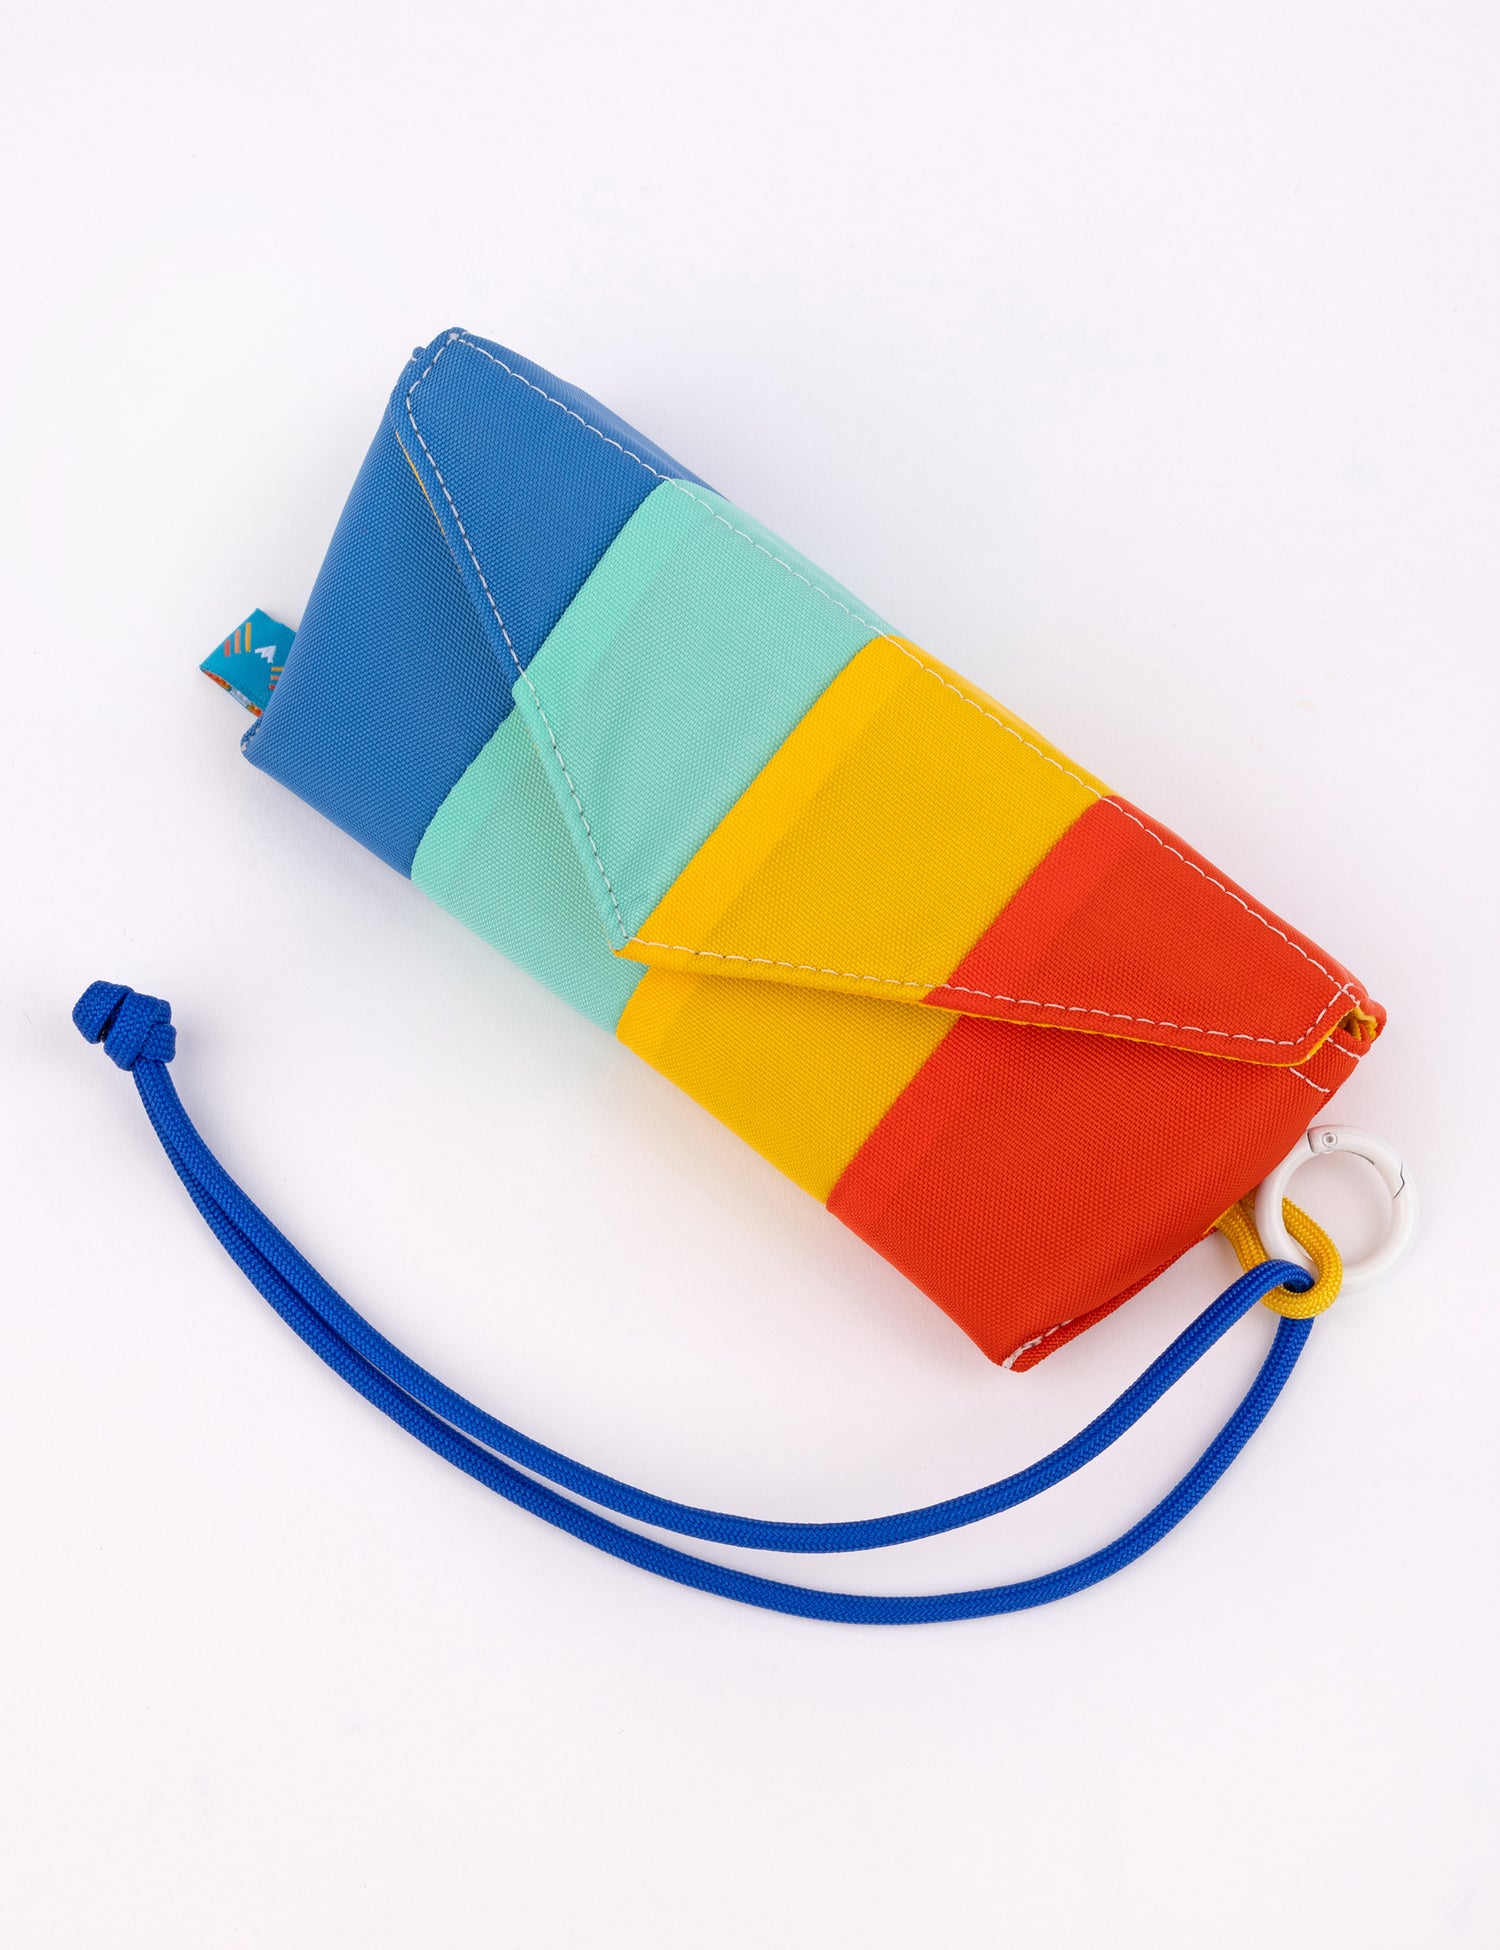 rectangular sunglasses case with red yellow teal and blue stripe design